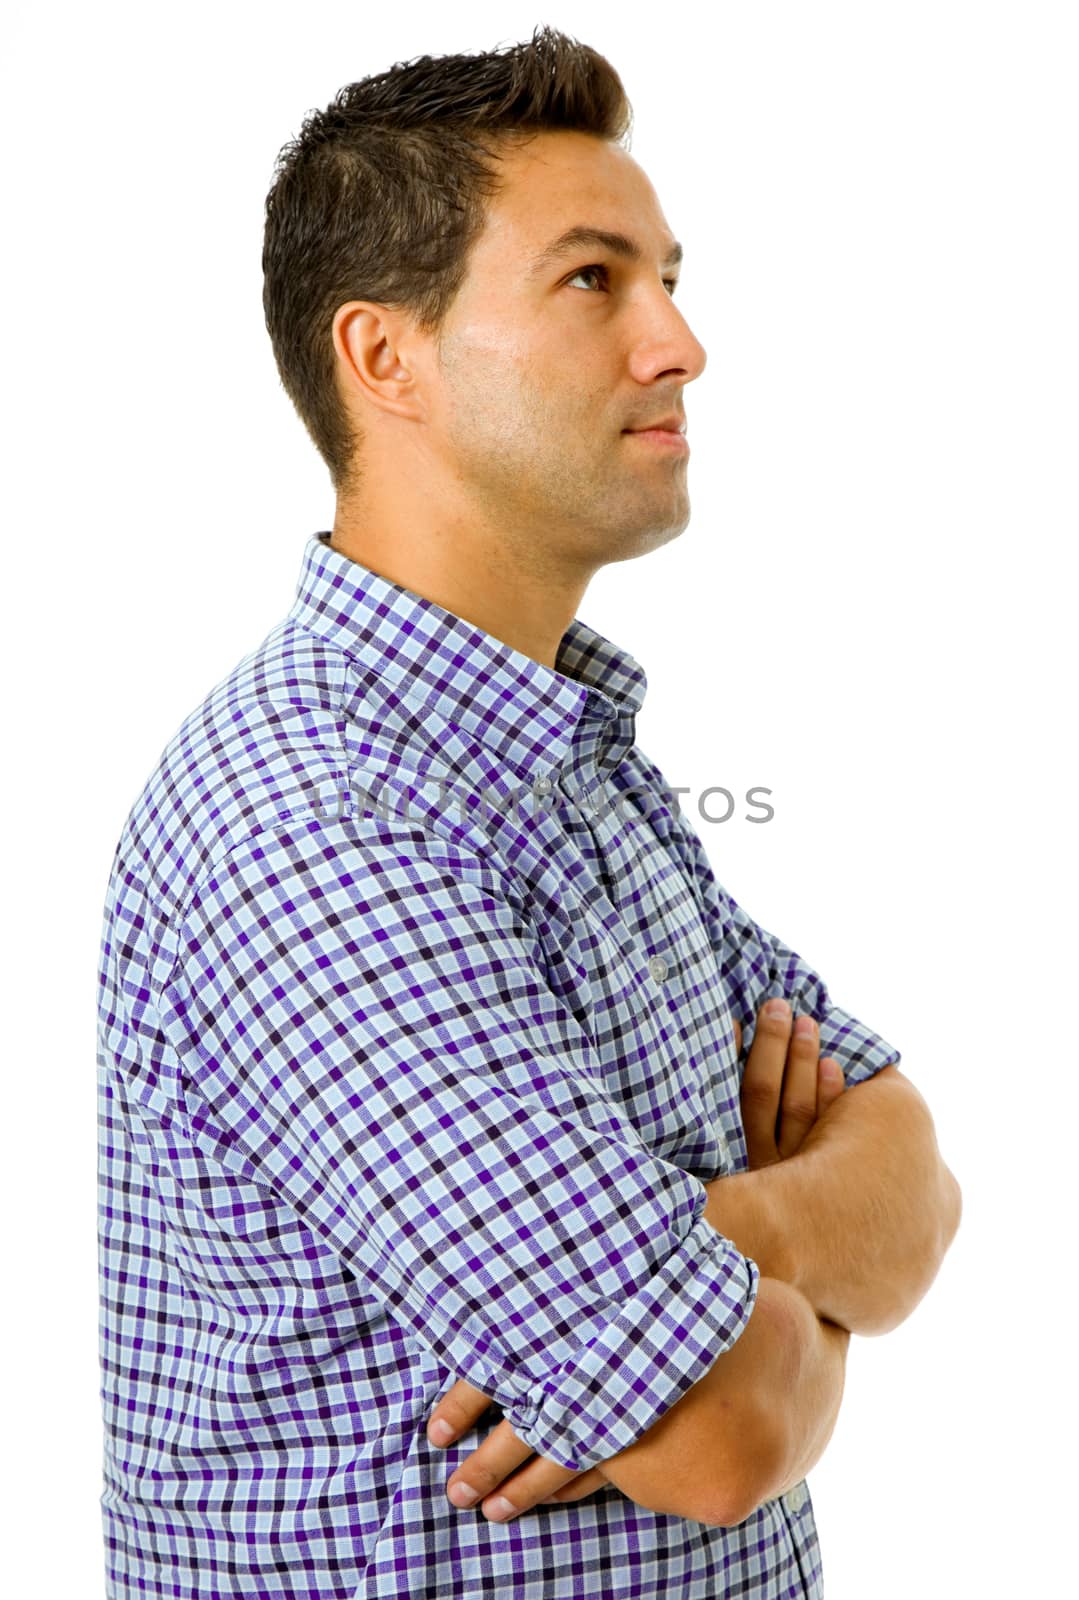 young casual pensive man portrait, isolated on white